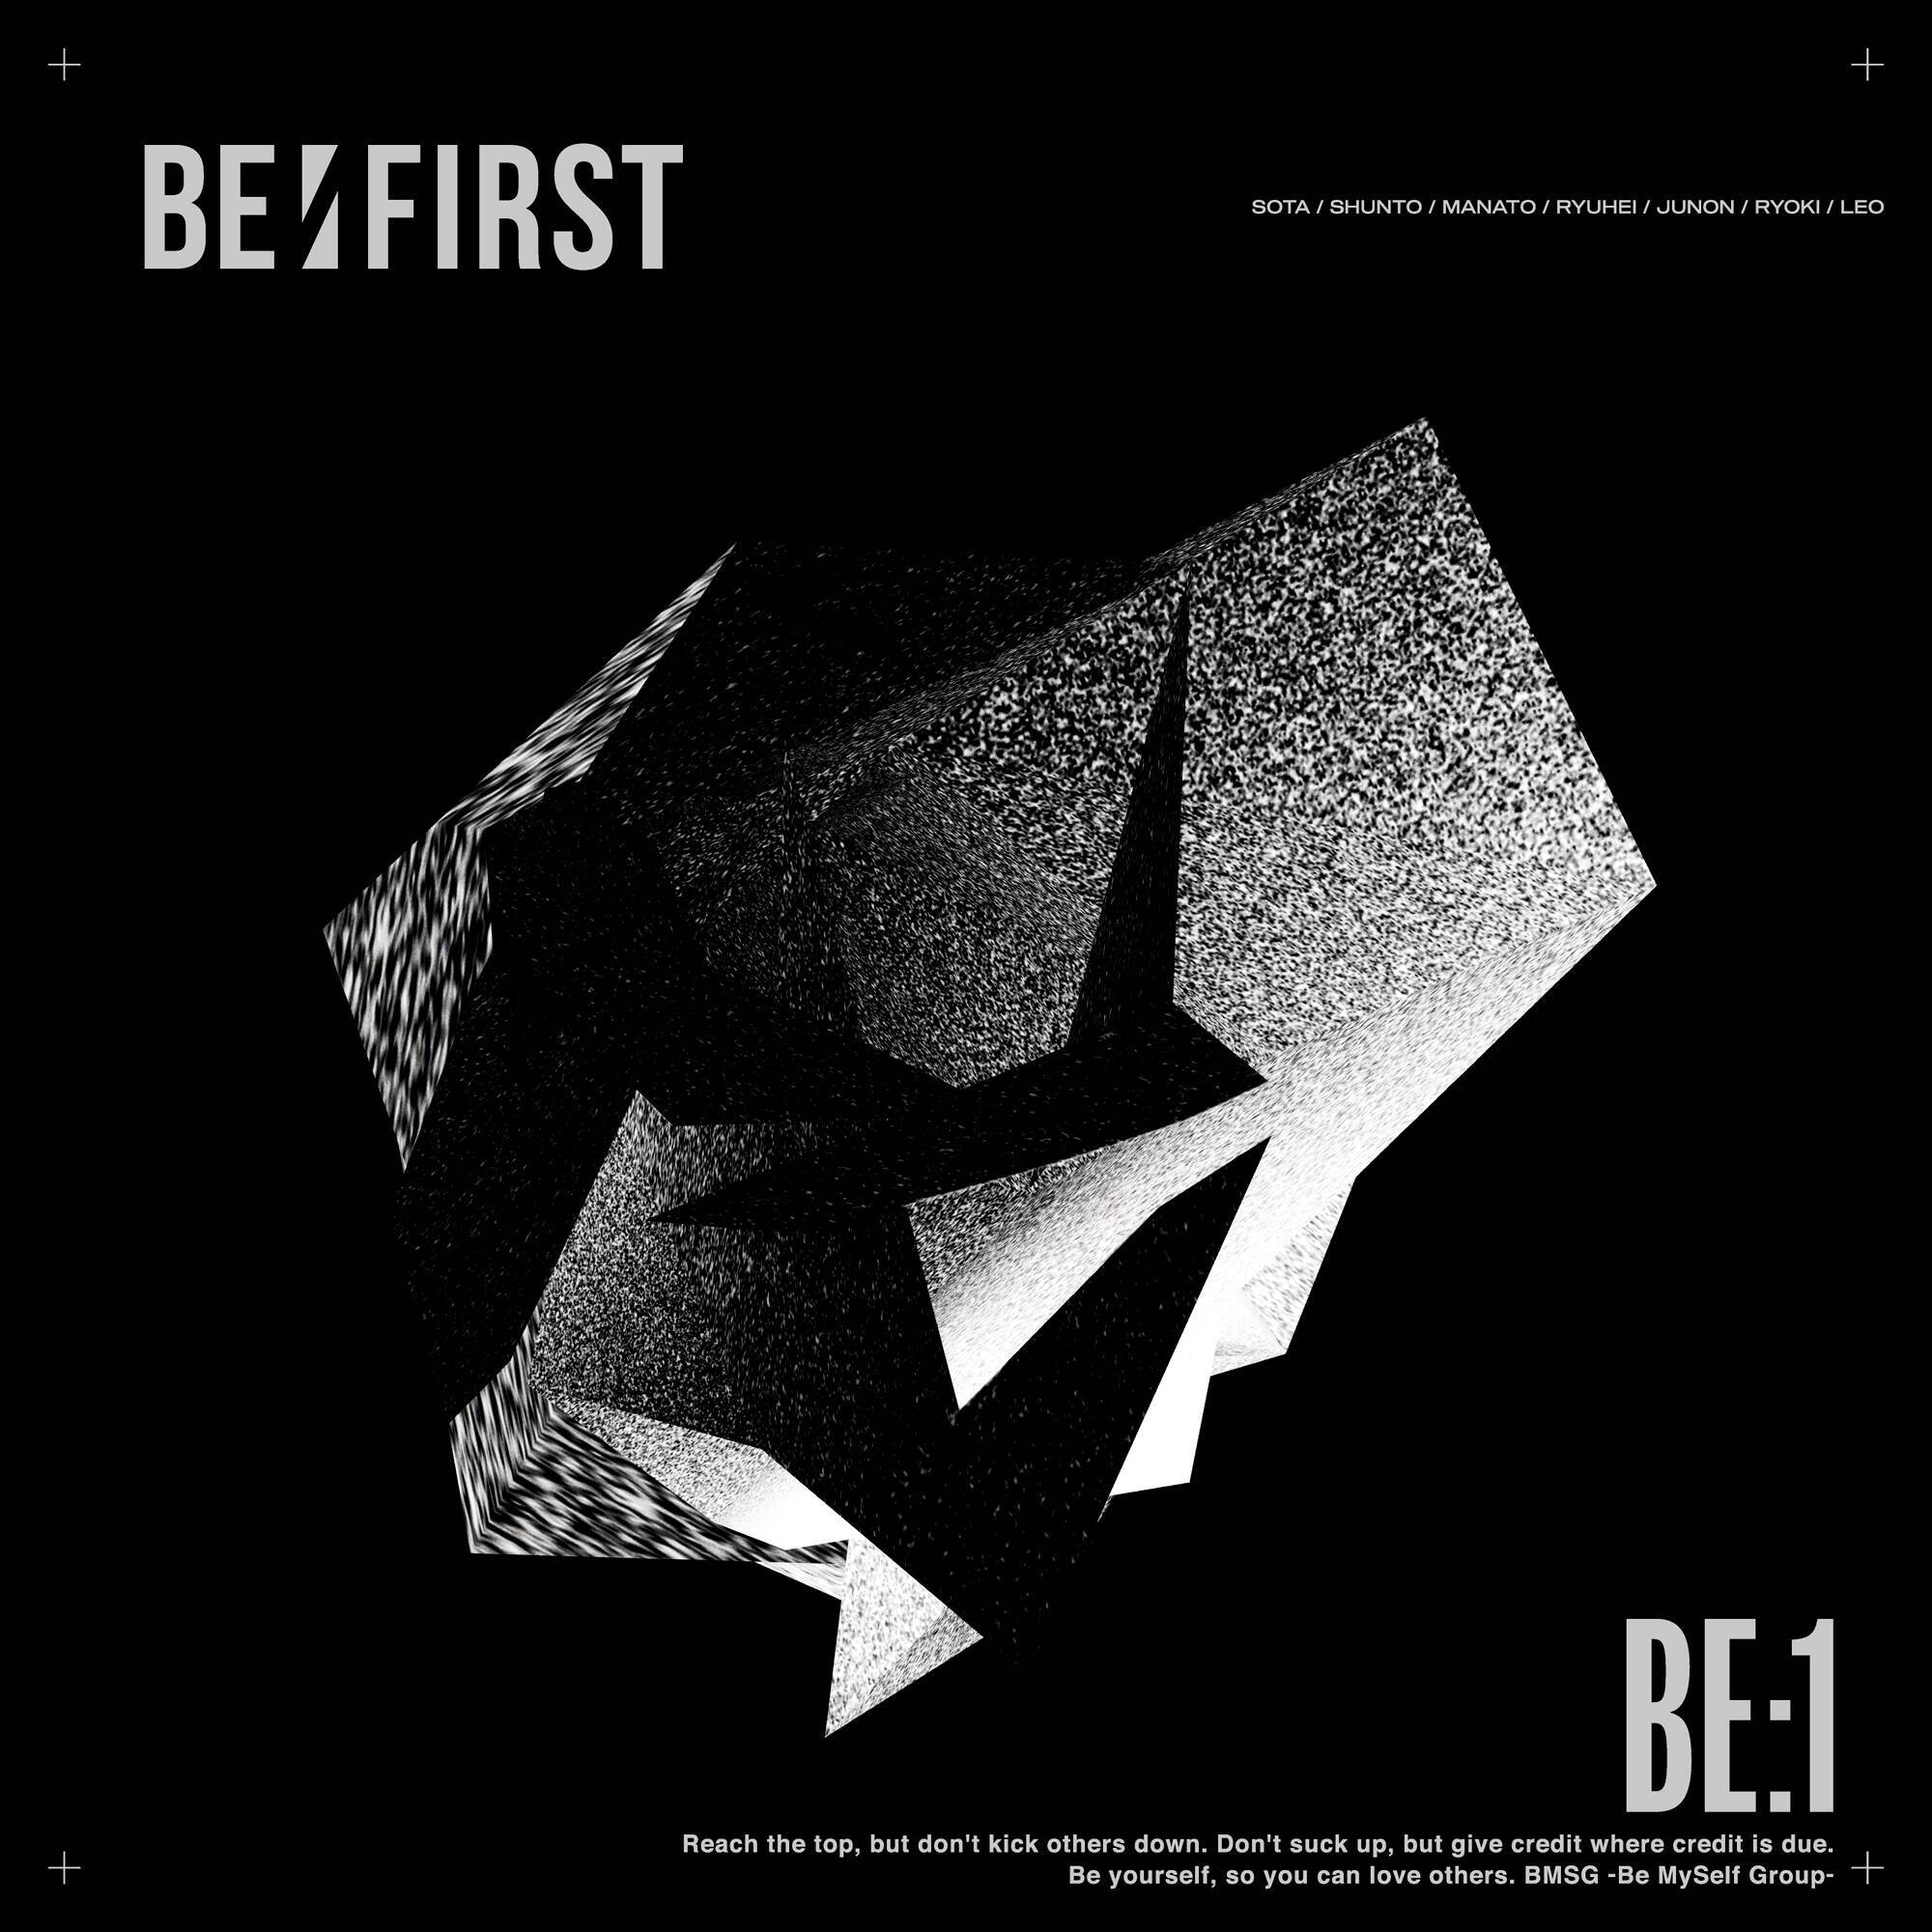 BE:FIRSTが1stアルバム『BE:1』リリース、新アー写公開